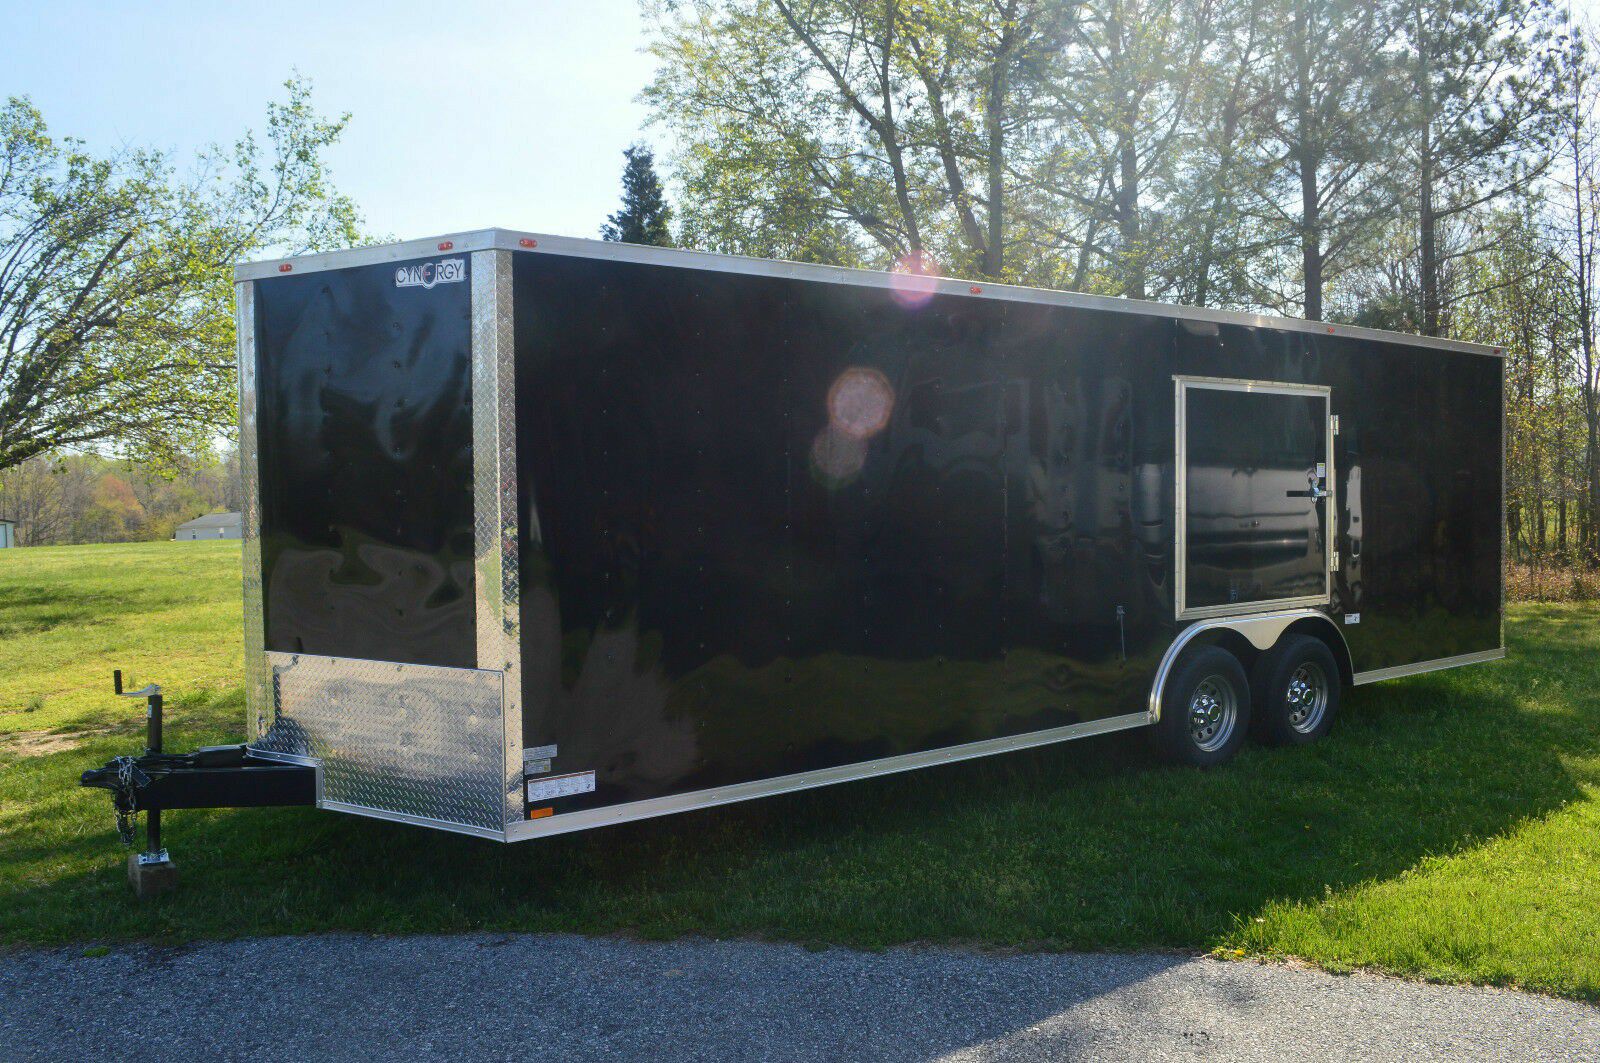 ENCLOSED TRAILERS ALL SIZES 20 24 28 32-SNOWMOBILE QUAD CAR HAULER MOTORCYCLE ATV STORAGE MOVING